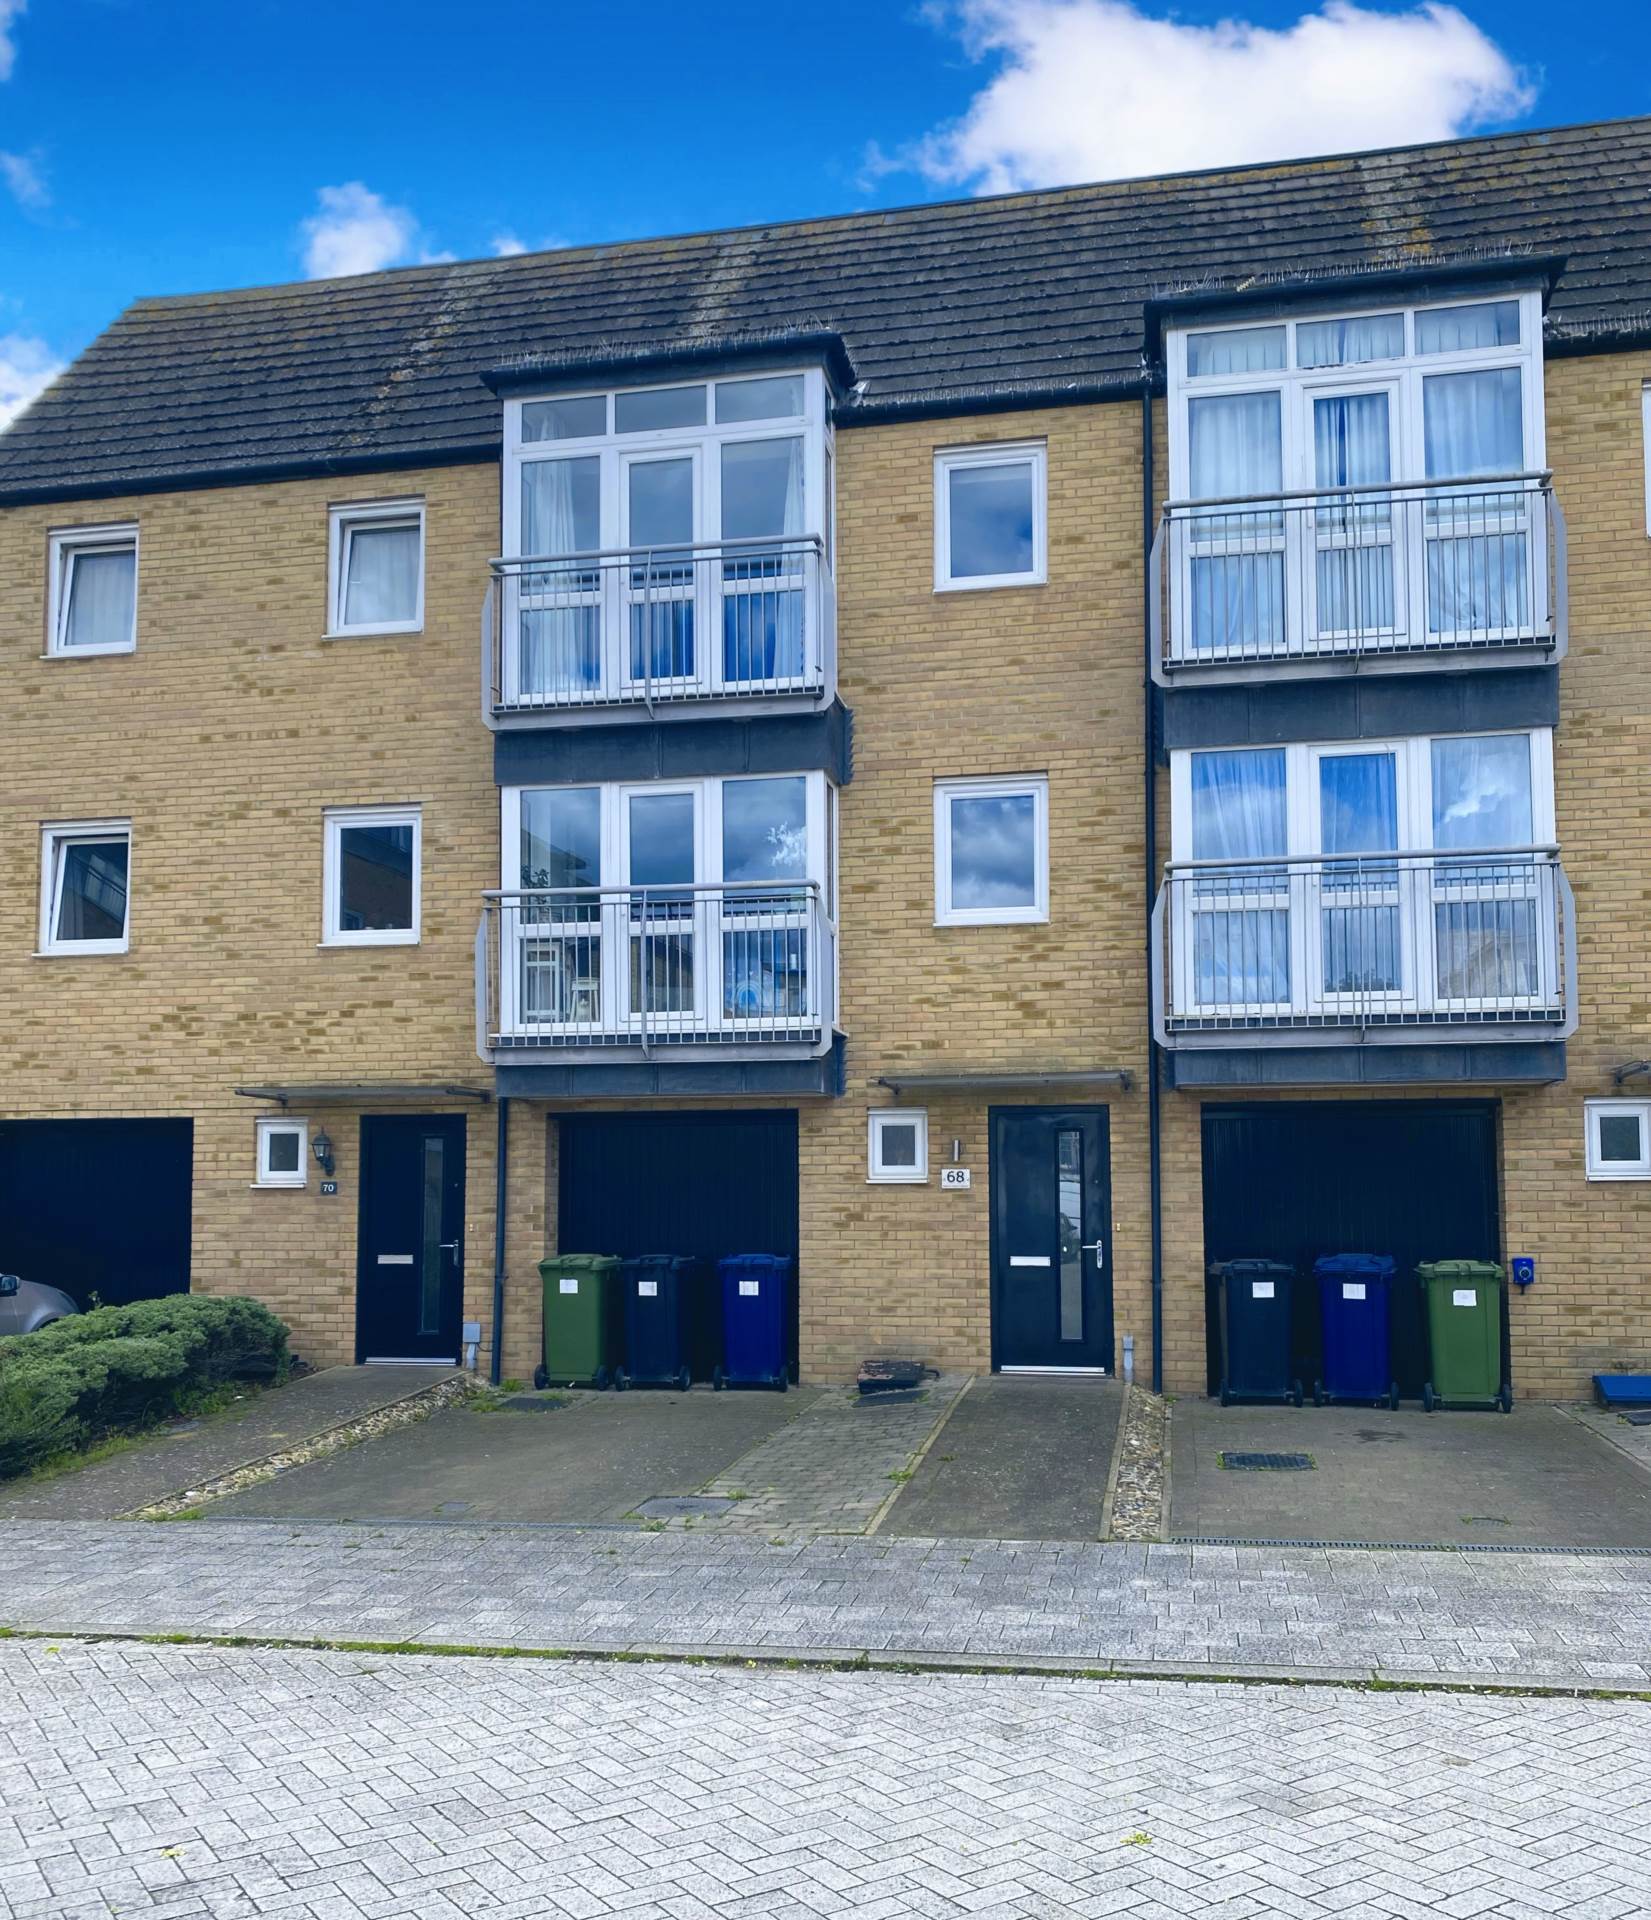 4 bed Town House for rent in St Neots. From Noonan Crane Property Management